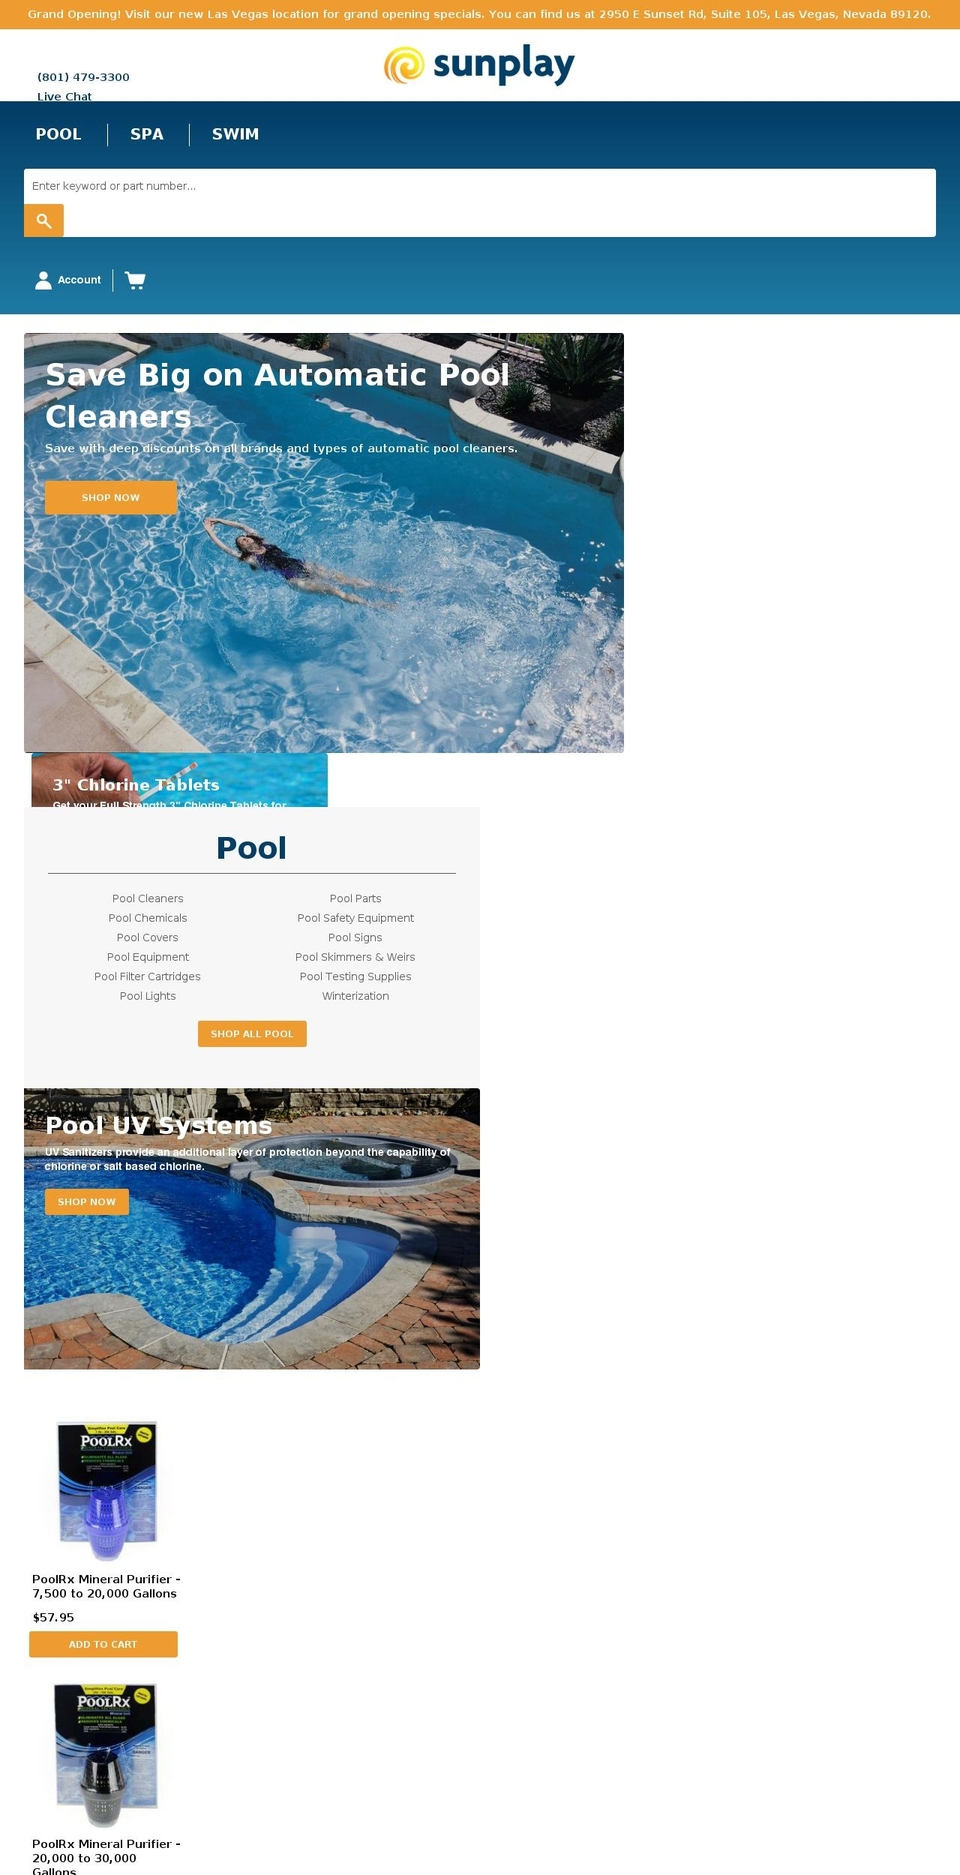 Sunplay v1.0 [Speck - Collection] Shopify theme site example sunplay.com